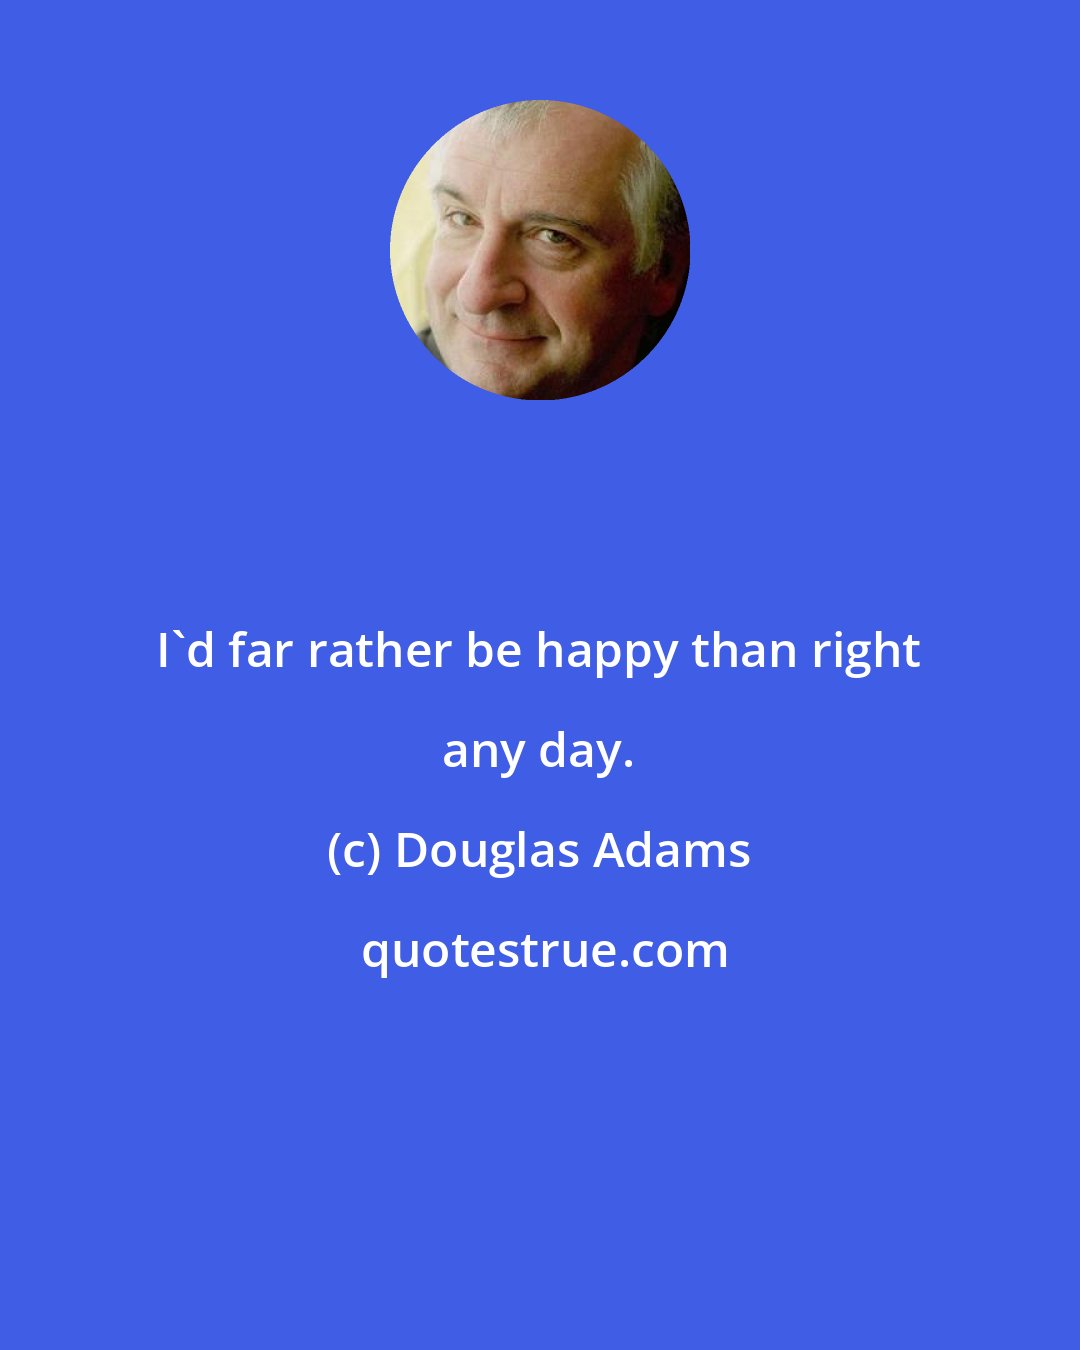 Douglas Adams: I'd far rather be happy than right any day.